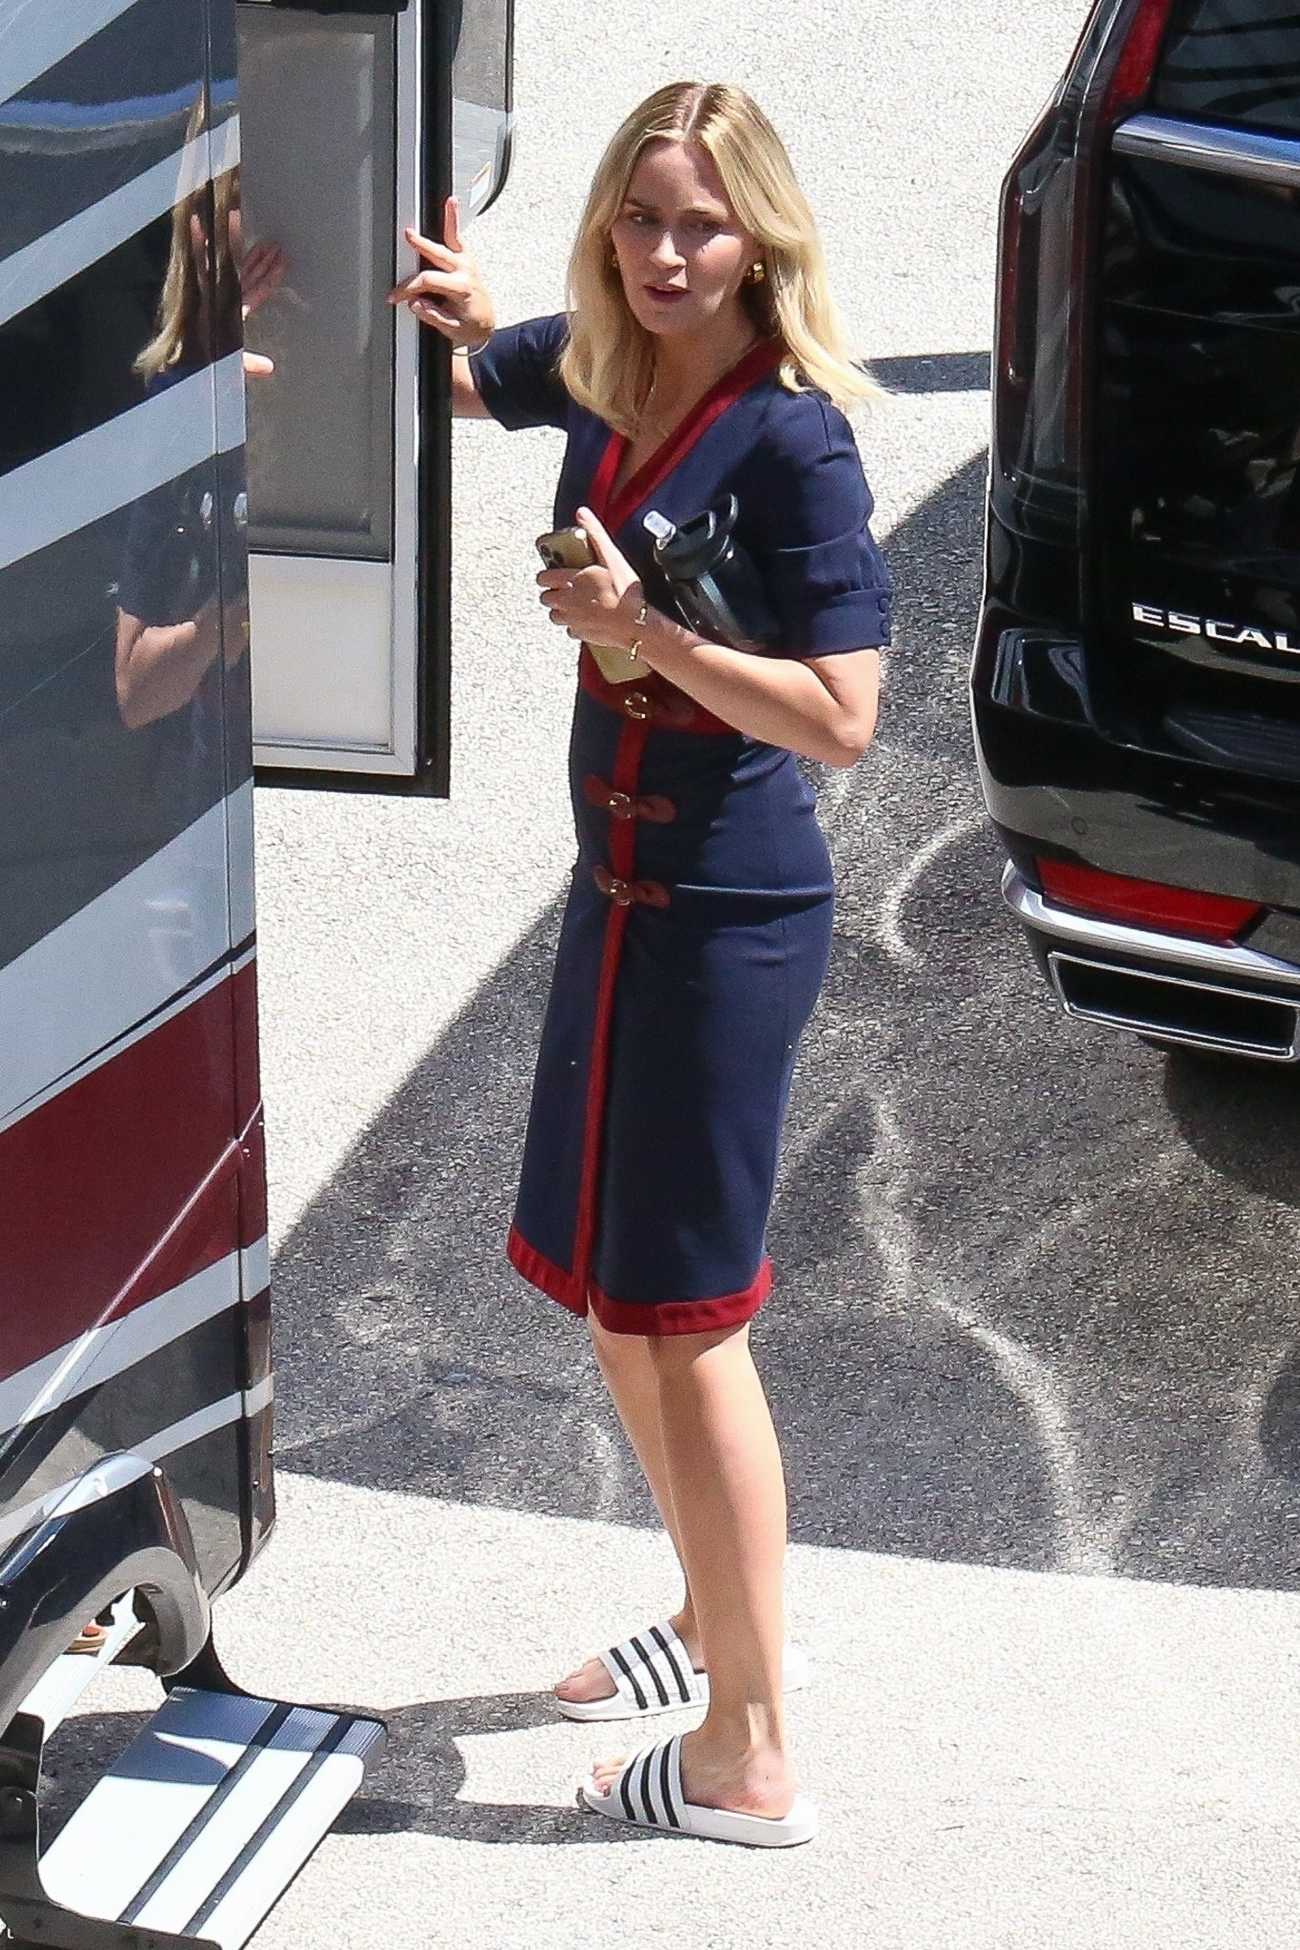 Emily_Blunt_spotted_on_set_filming_The_Pain_Hustlers_in_Miami_Aug2C_30202201.jpg